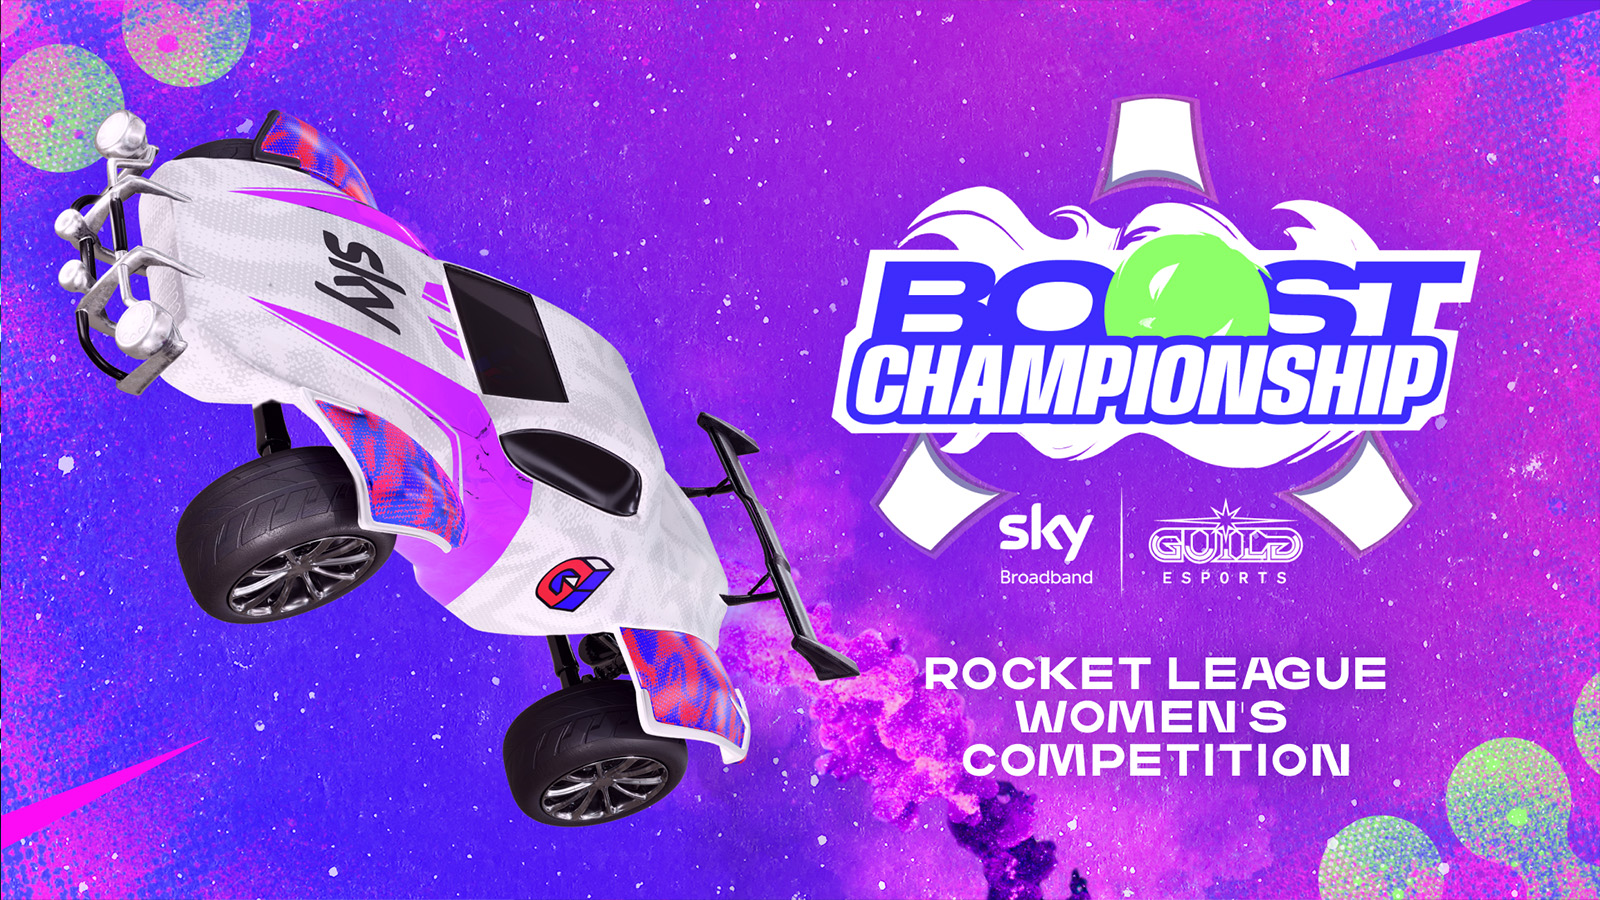 Boost Championship is a Rocket League tournament for women ONE Esports